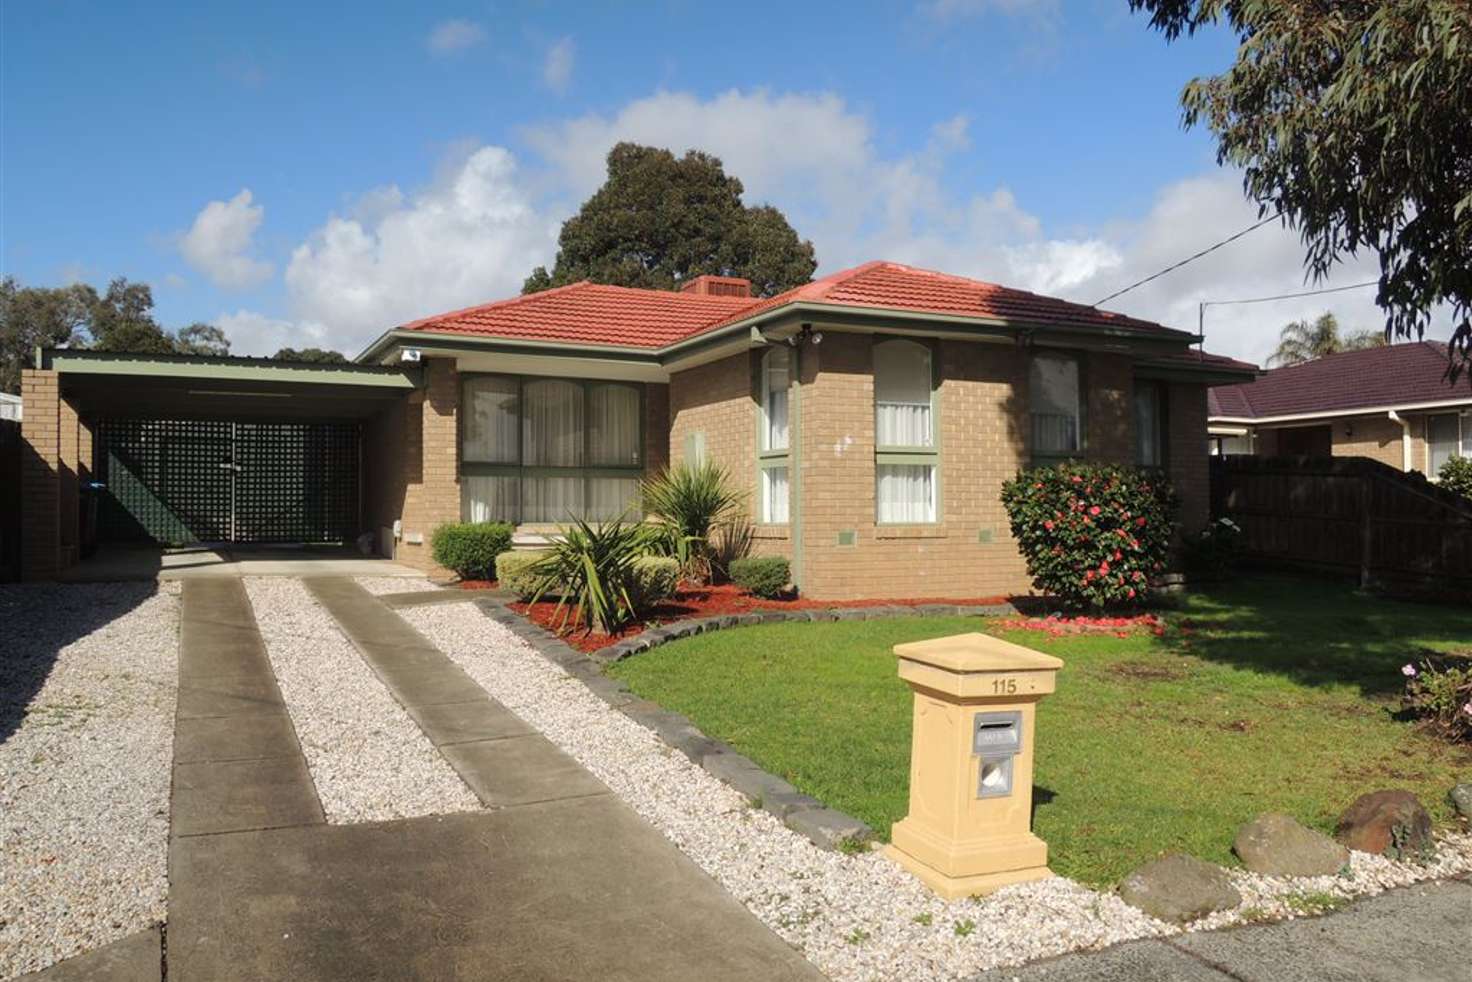 Main view of Homely house listing, 115 George Street, Scoresby VIC 3179